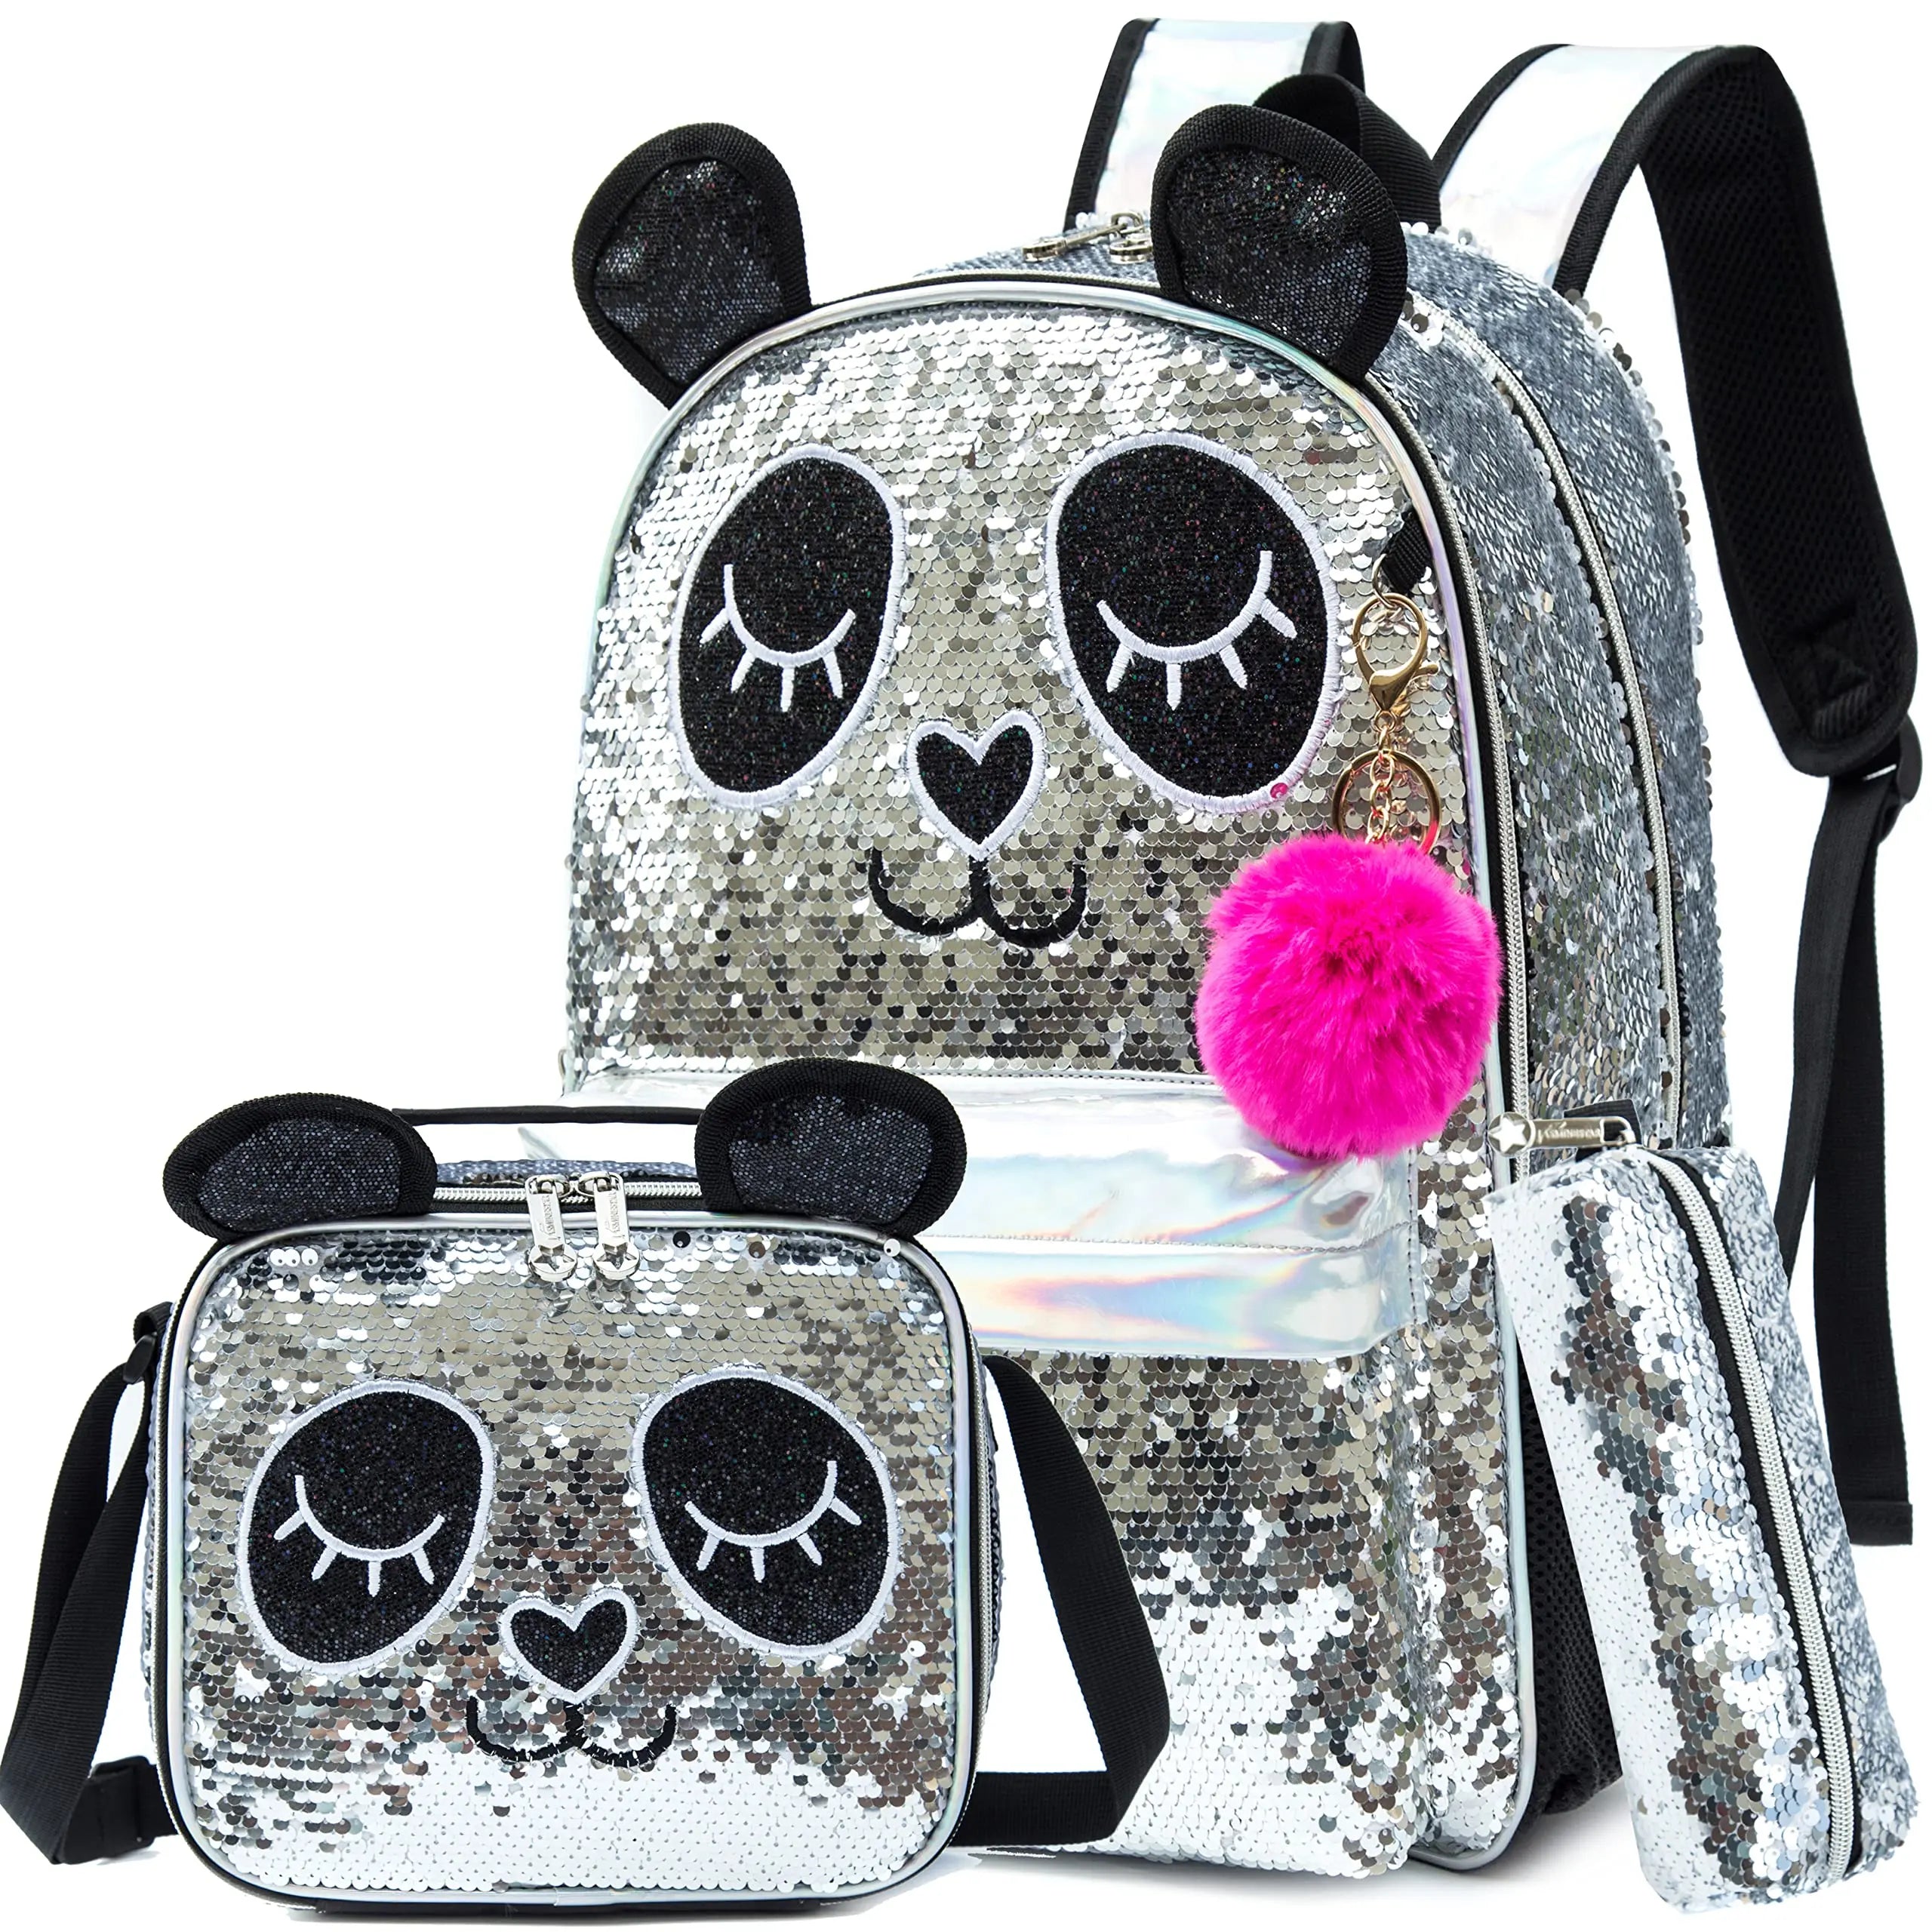 Girls' 16" School Backpack Set - 3pcs with Lunch Box, Ideal for Elementary Students, Travel Sequin Backpack 11901-3yinsePanda